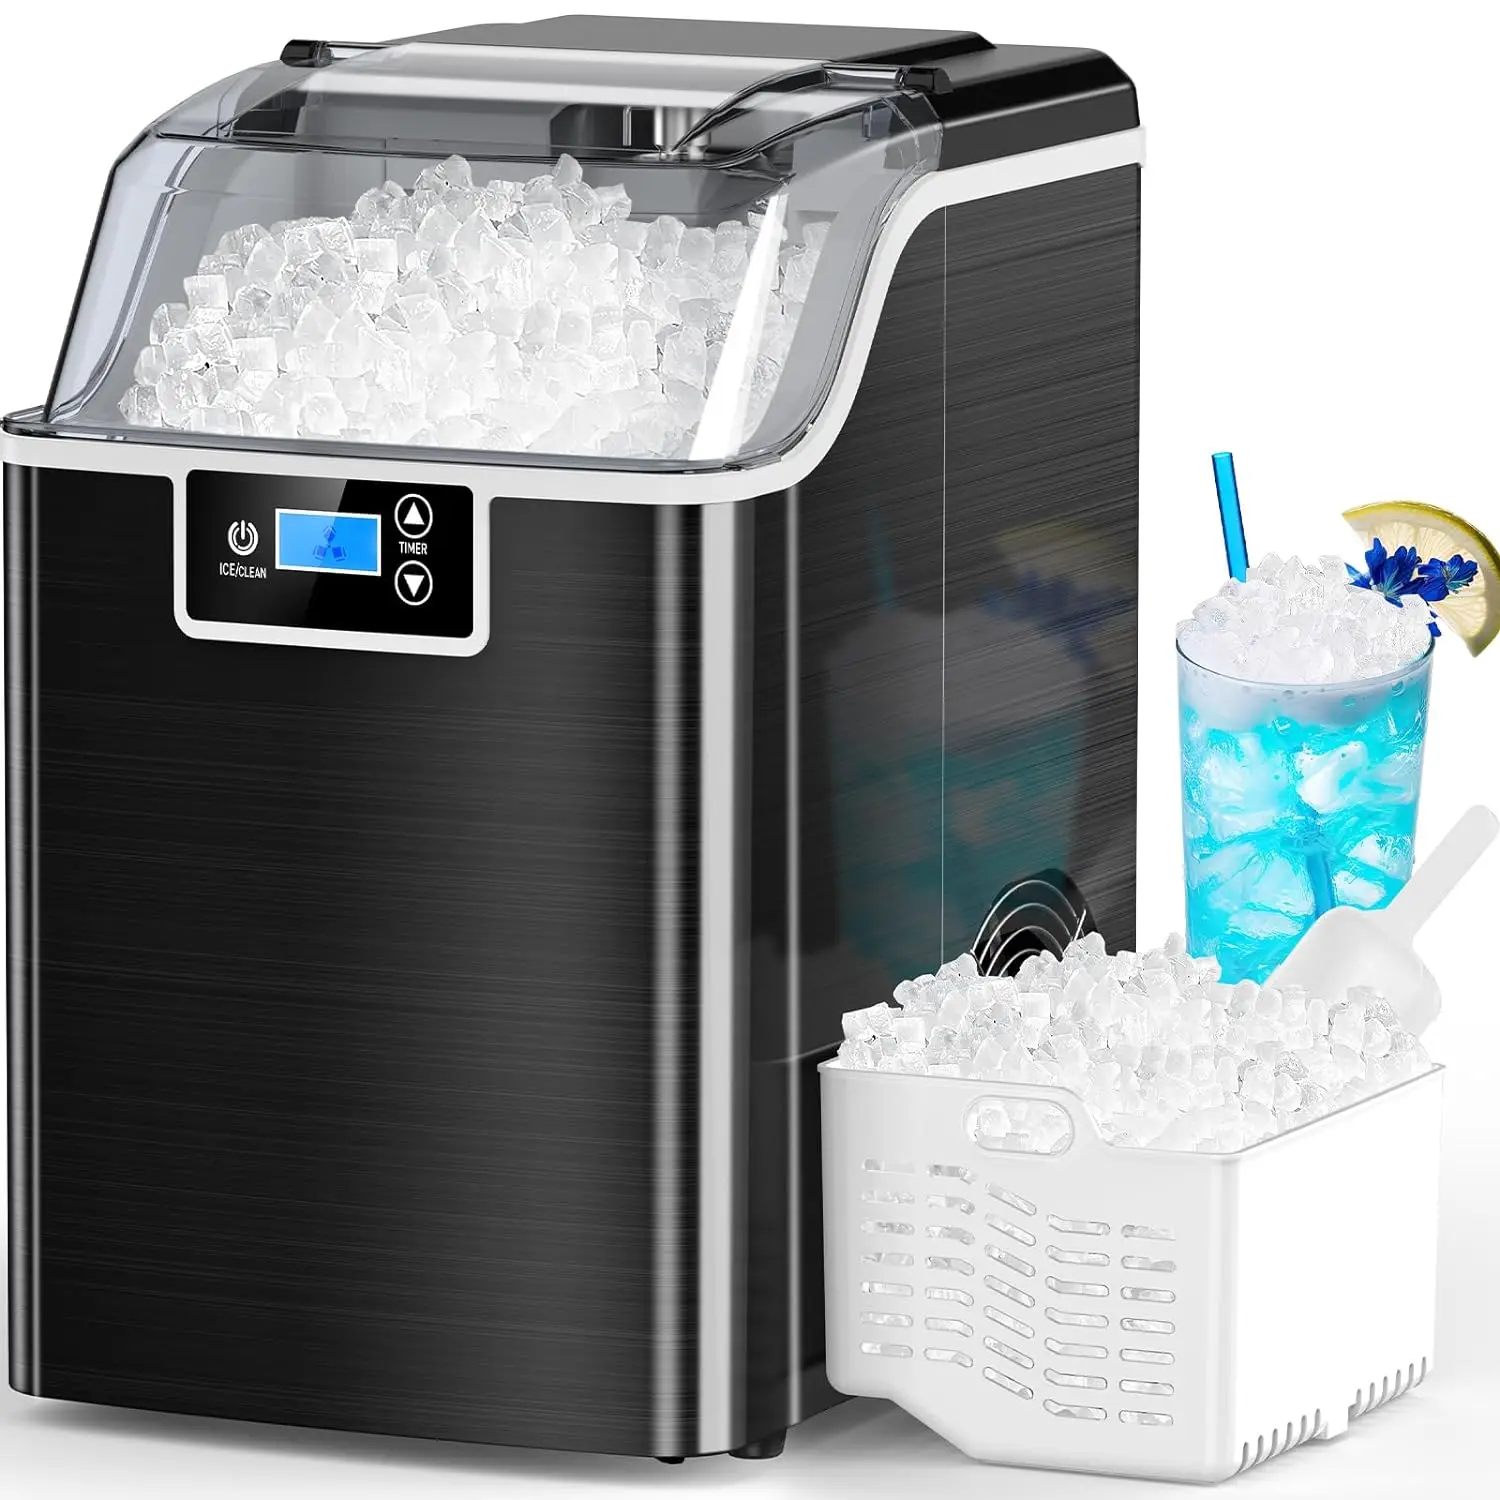 

Kndko Nugget Ice Makers Countertop,45lbs/Day,Countertop Ice Maker Crushed Ice,24H Timer,3.3 Pounds Basket,Self Cleaning